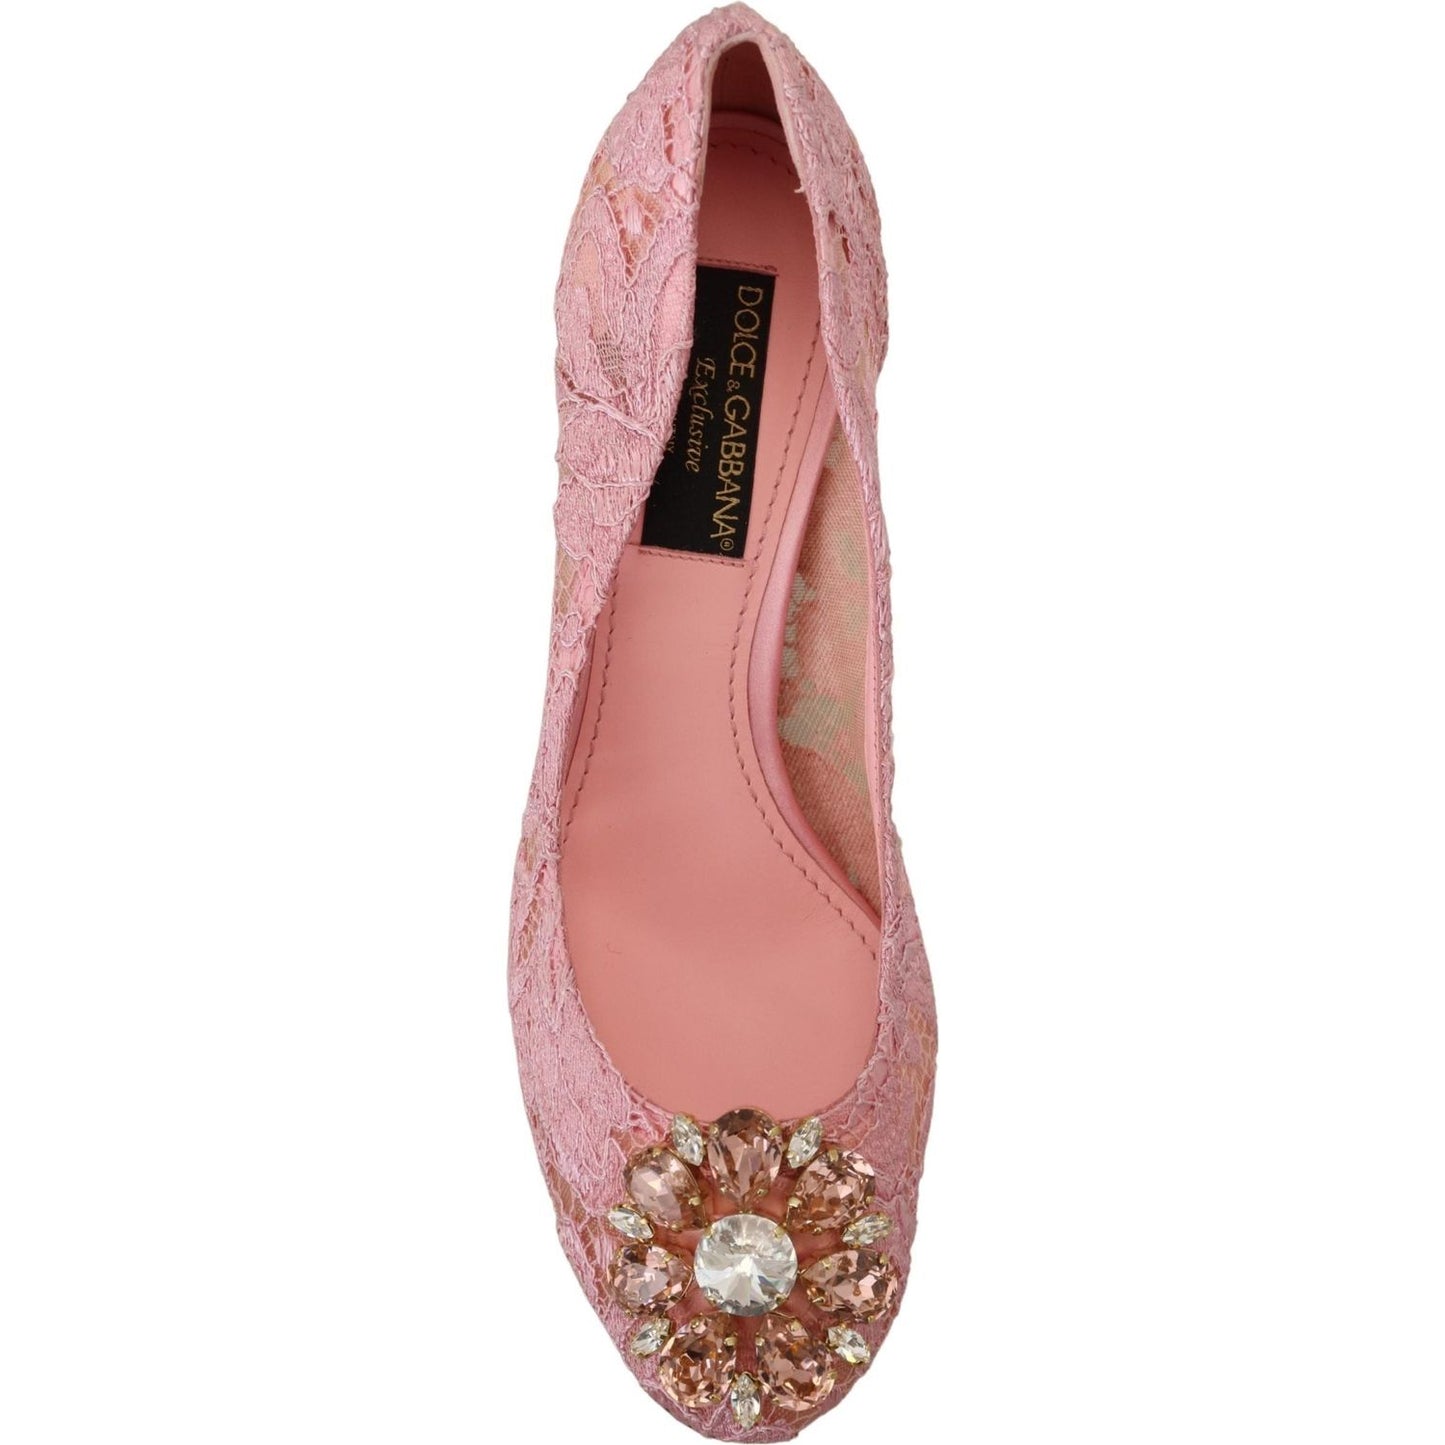 Dolce & Gabbana Pastel Pink Lace Crystal Embellished Pumps pink-taormina-lace-crystal-pumps-pastel-shoes